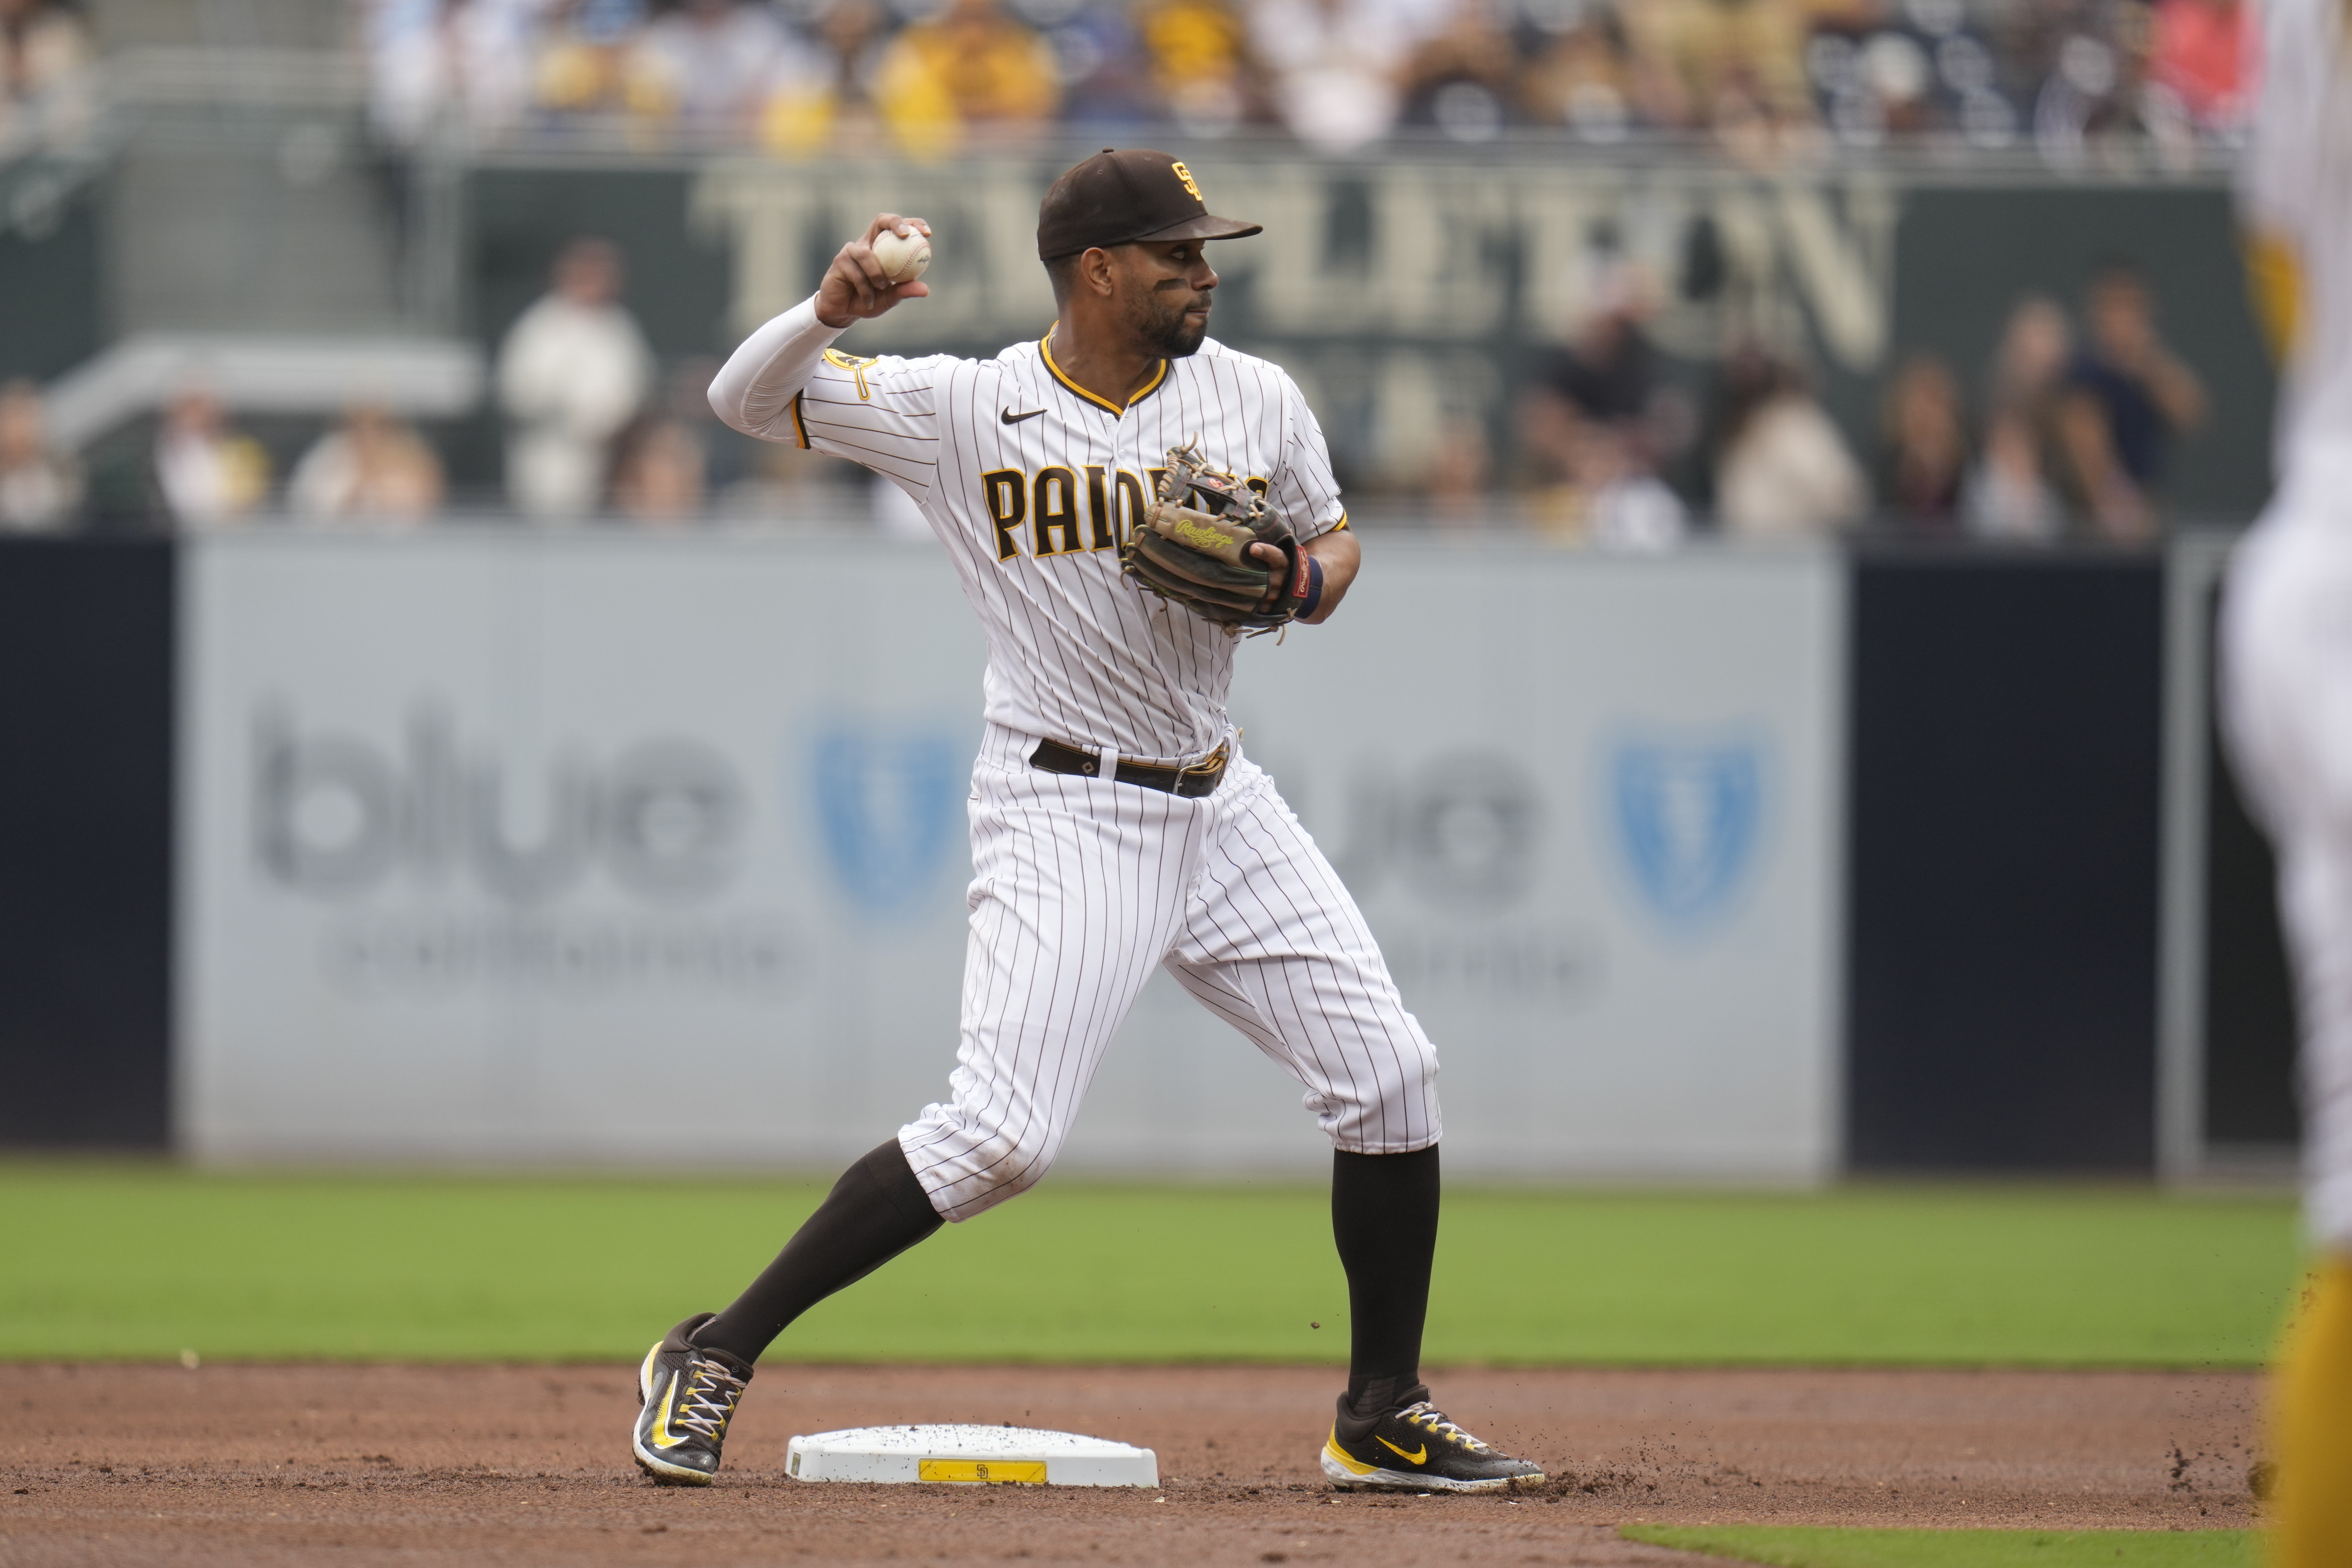 Xander Bogaerts and the San Diego Padres Adjust Expectations - The